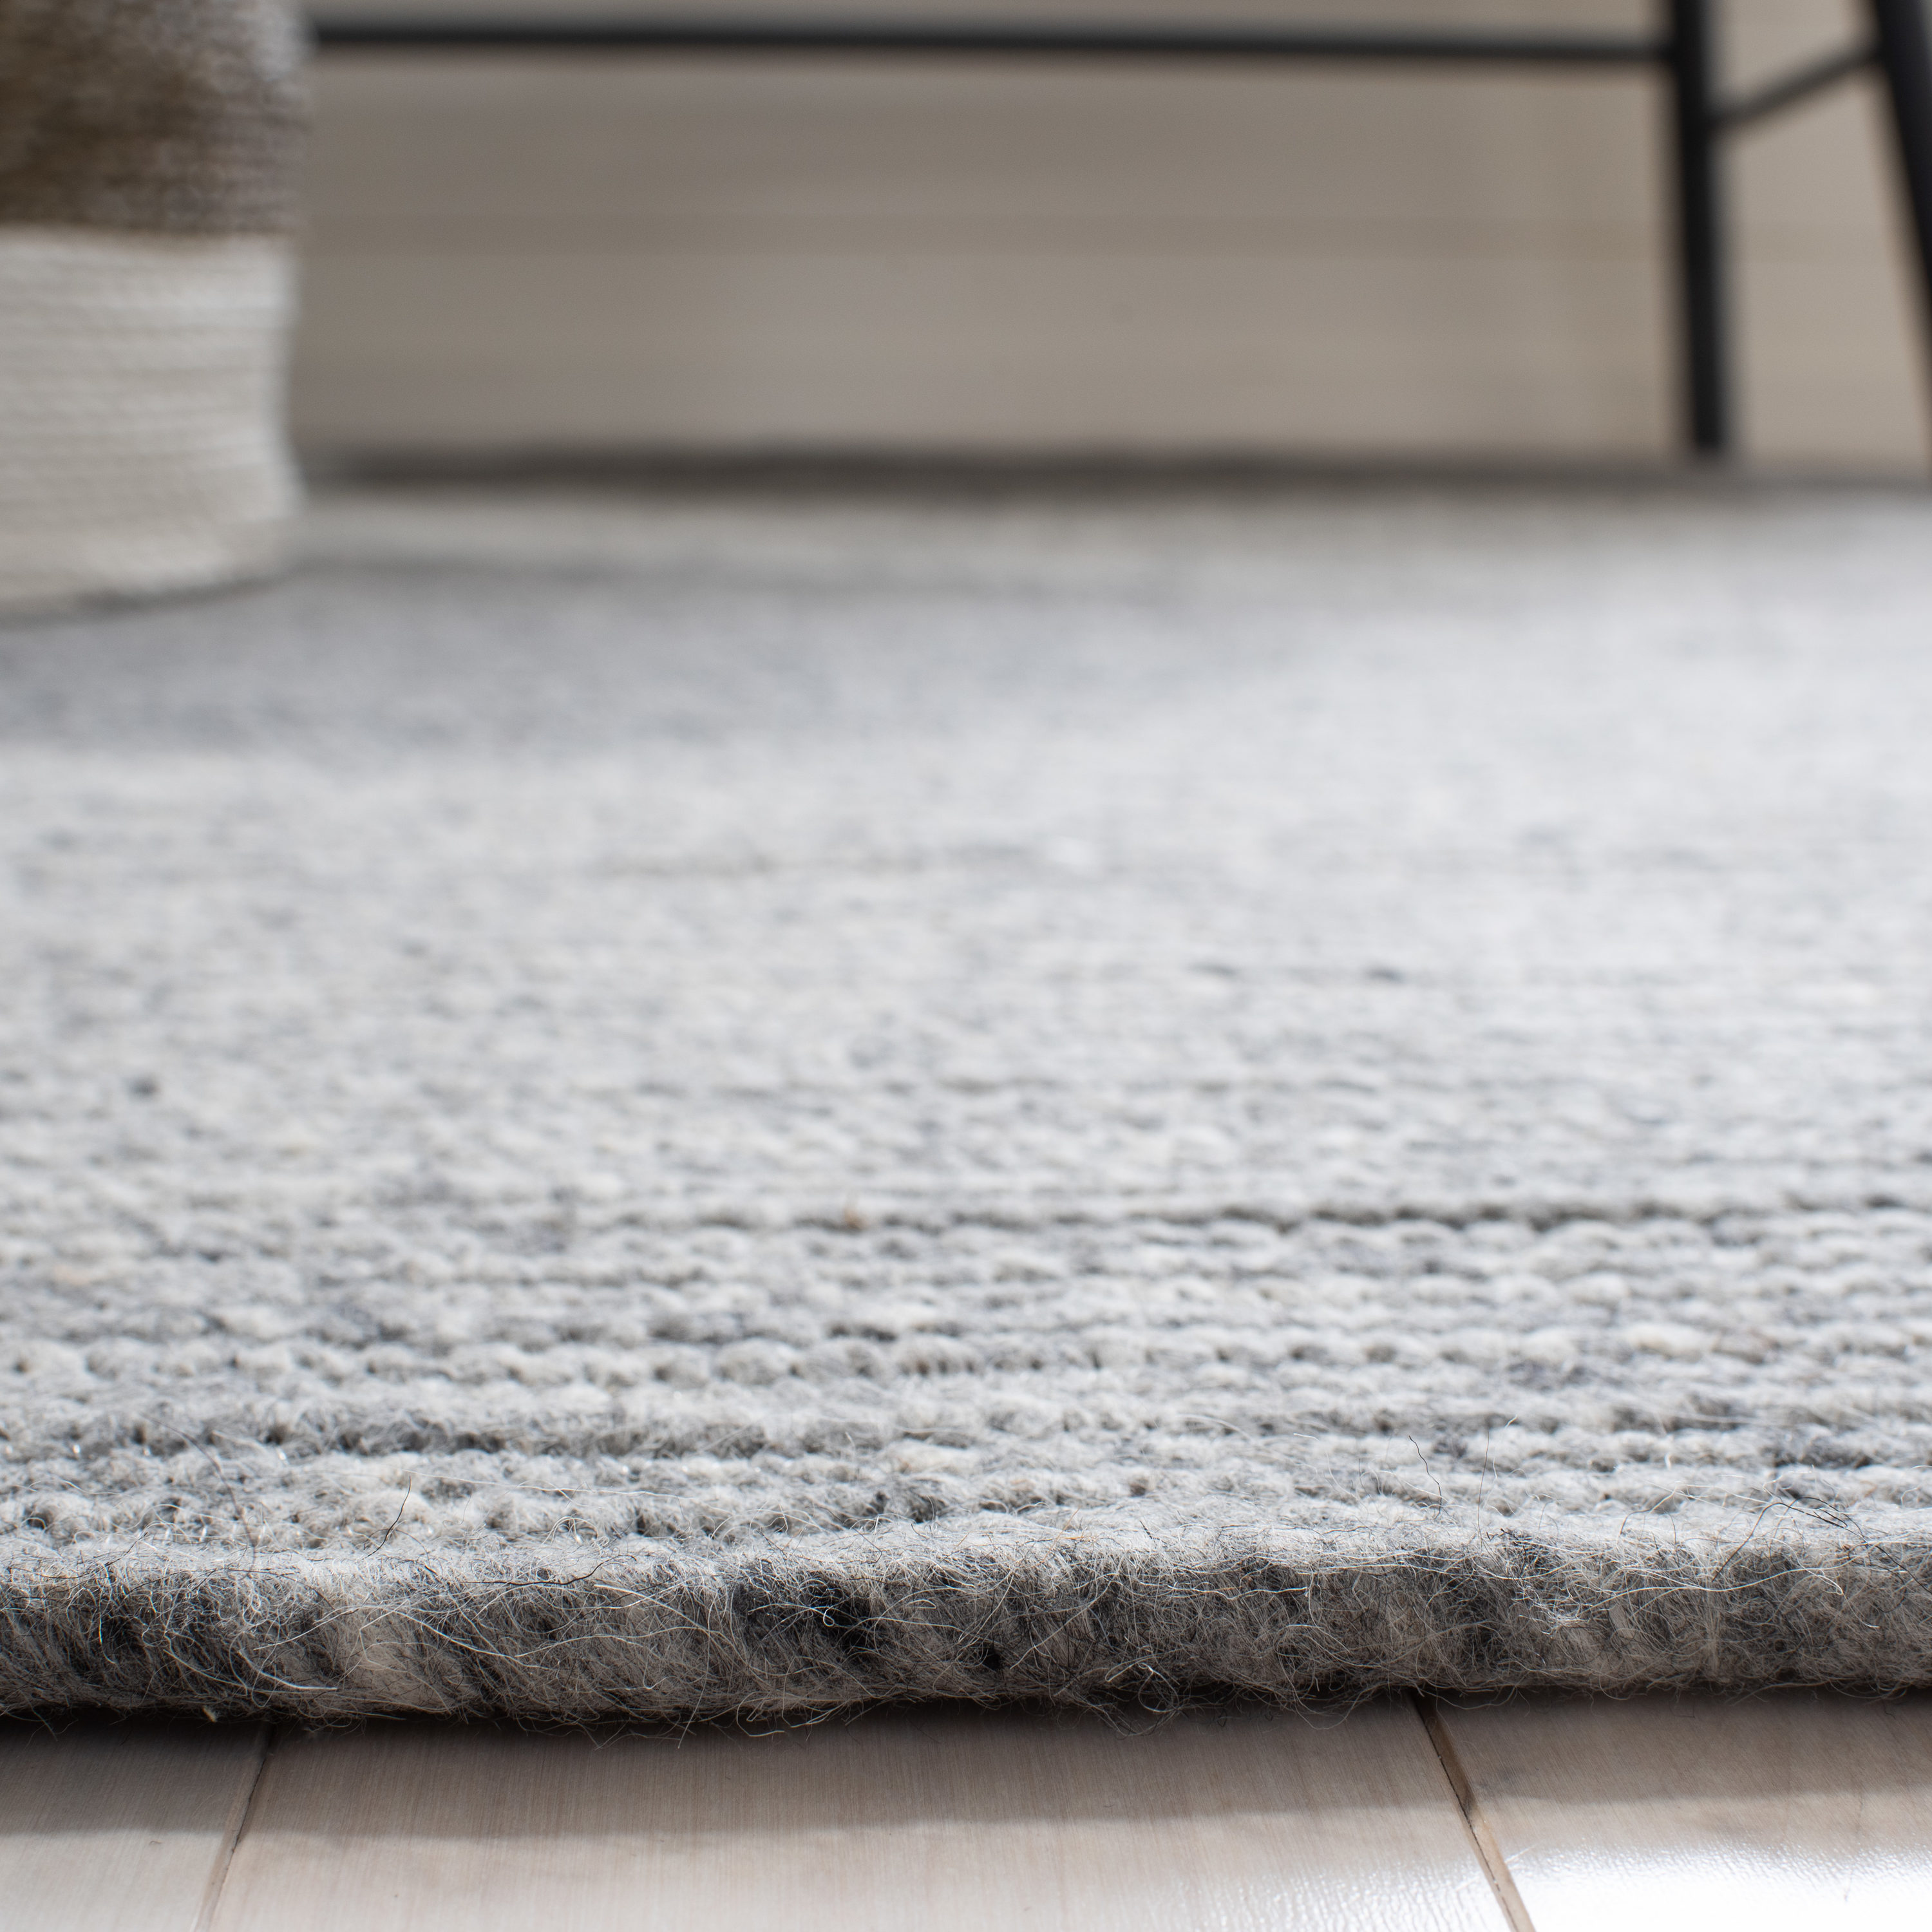 Safavieh Braided Arja 5 x 5 Wool Light Gray Round Indoor Coastal Area Rug  in the Rugs department at